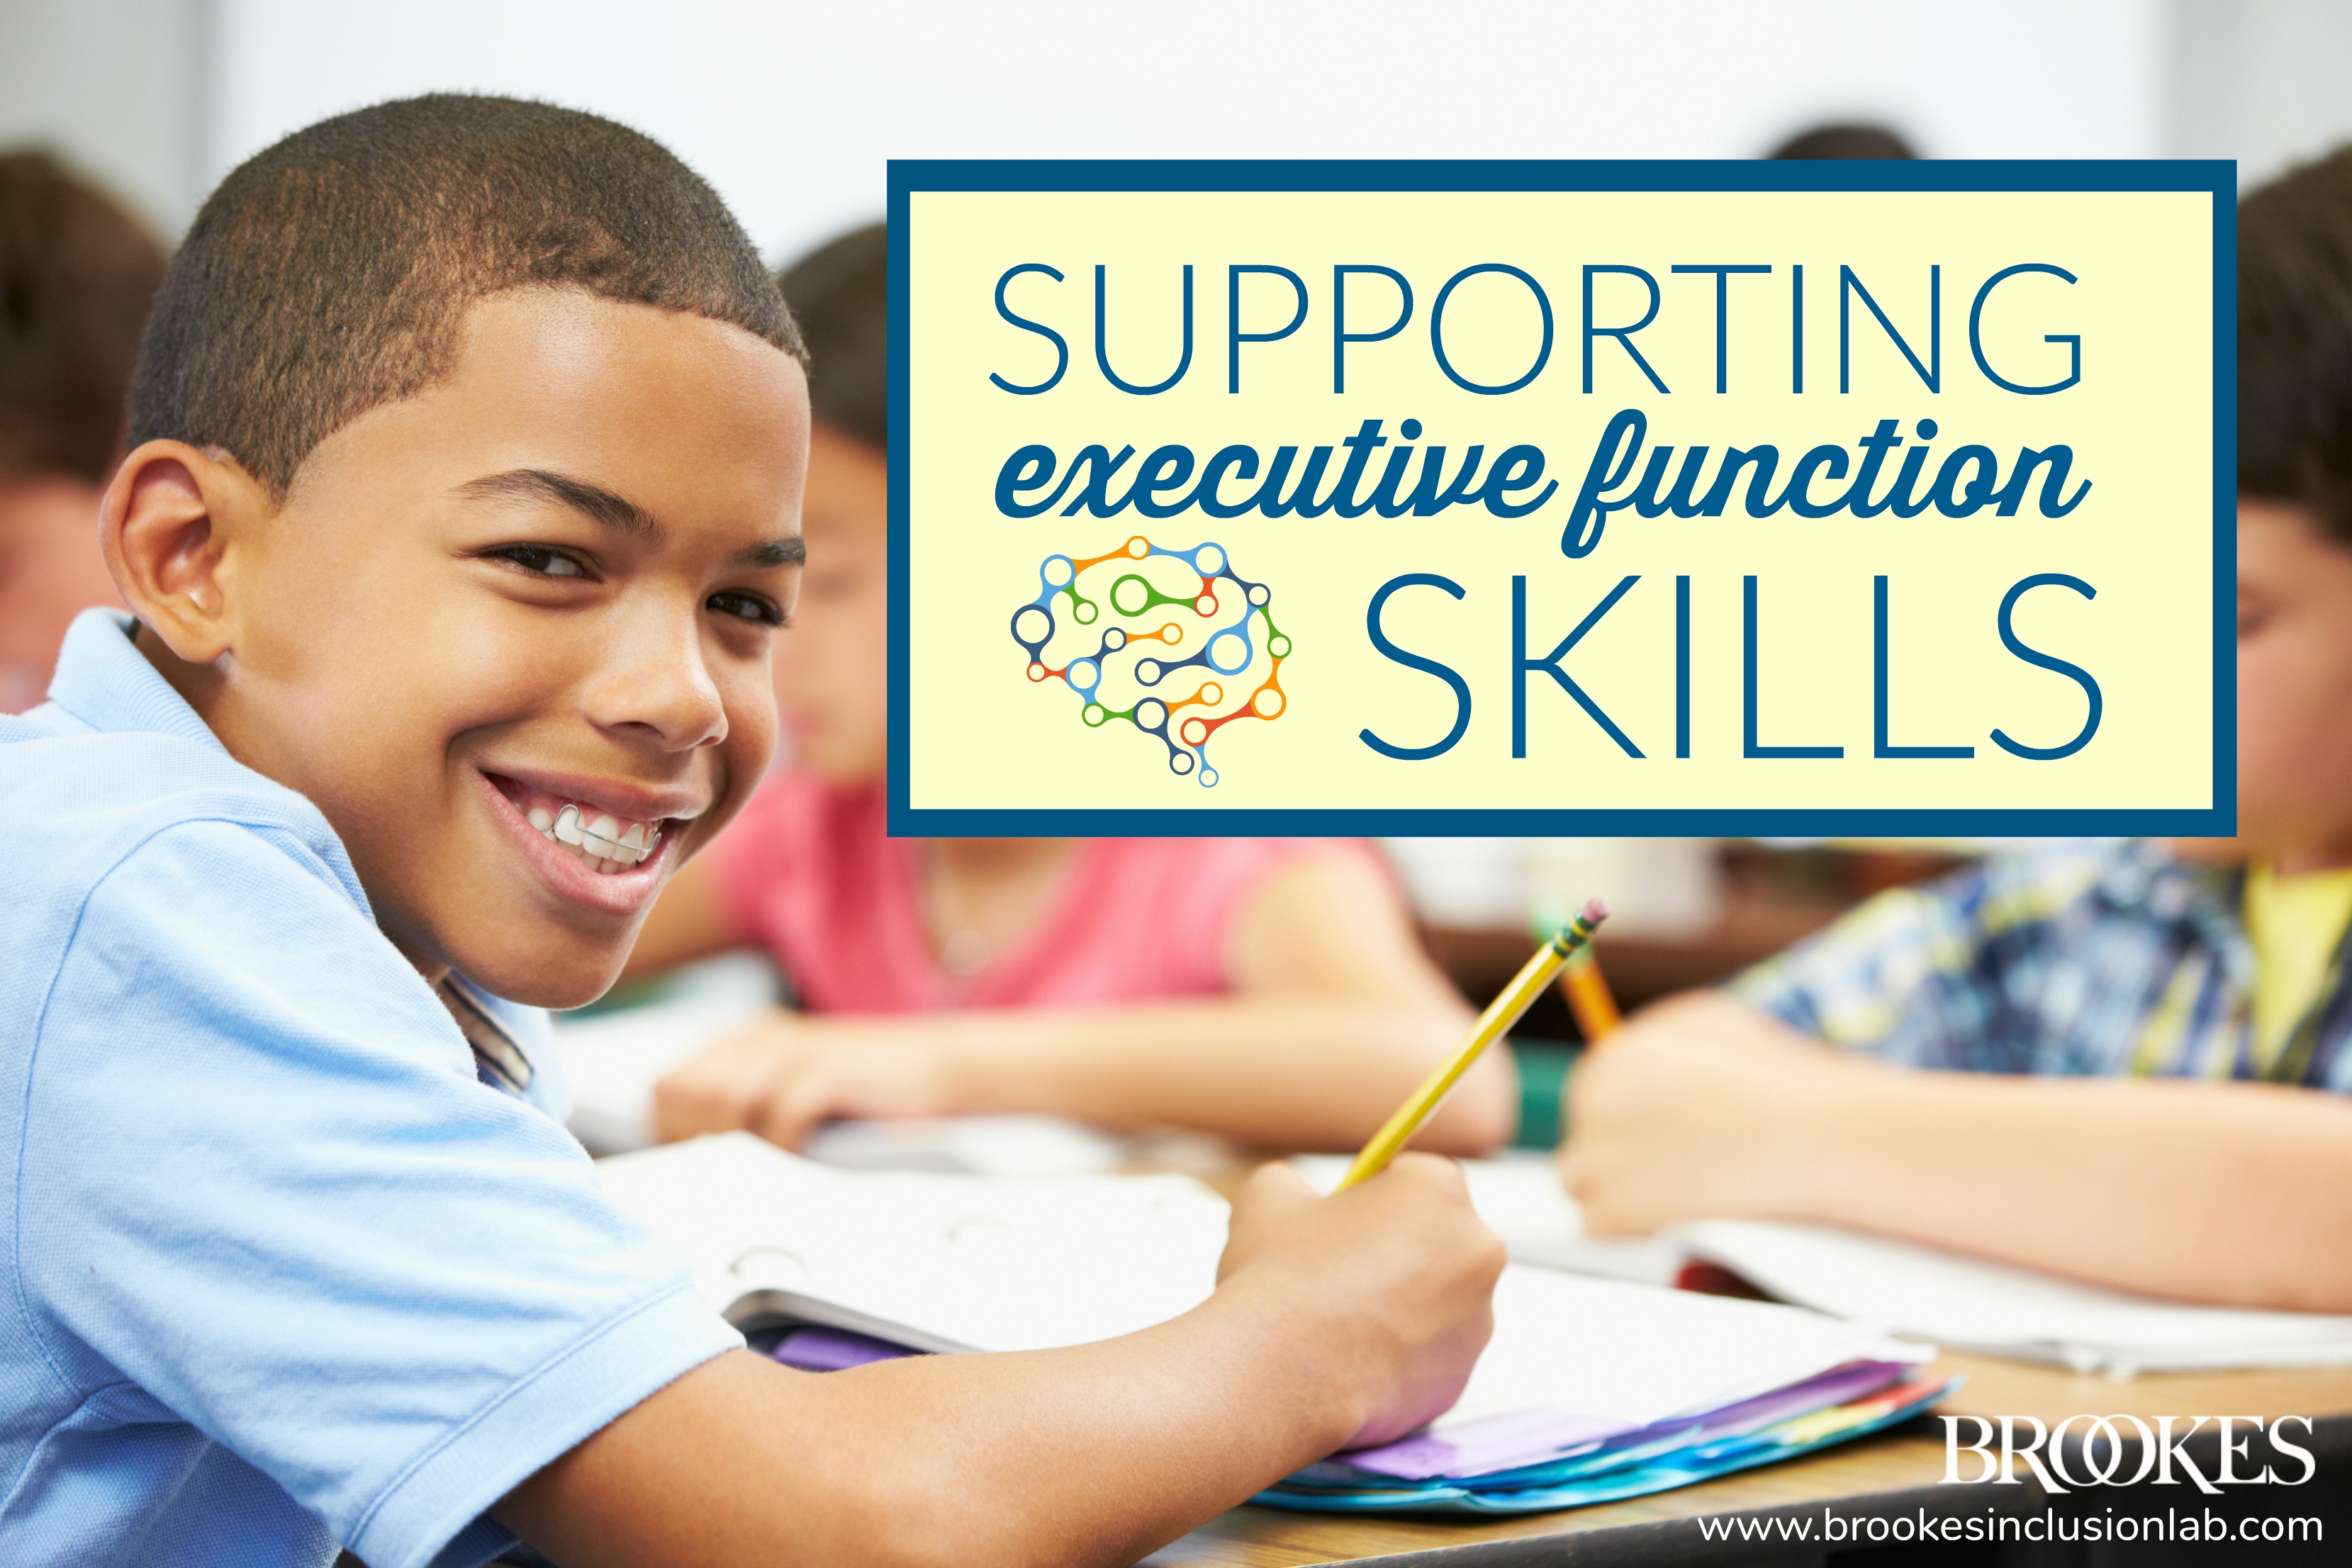 12 Things You Can Do To Support Students With Executive Function